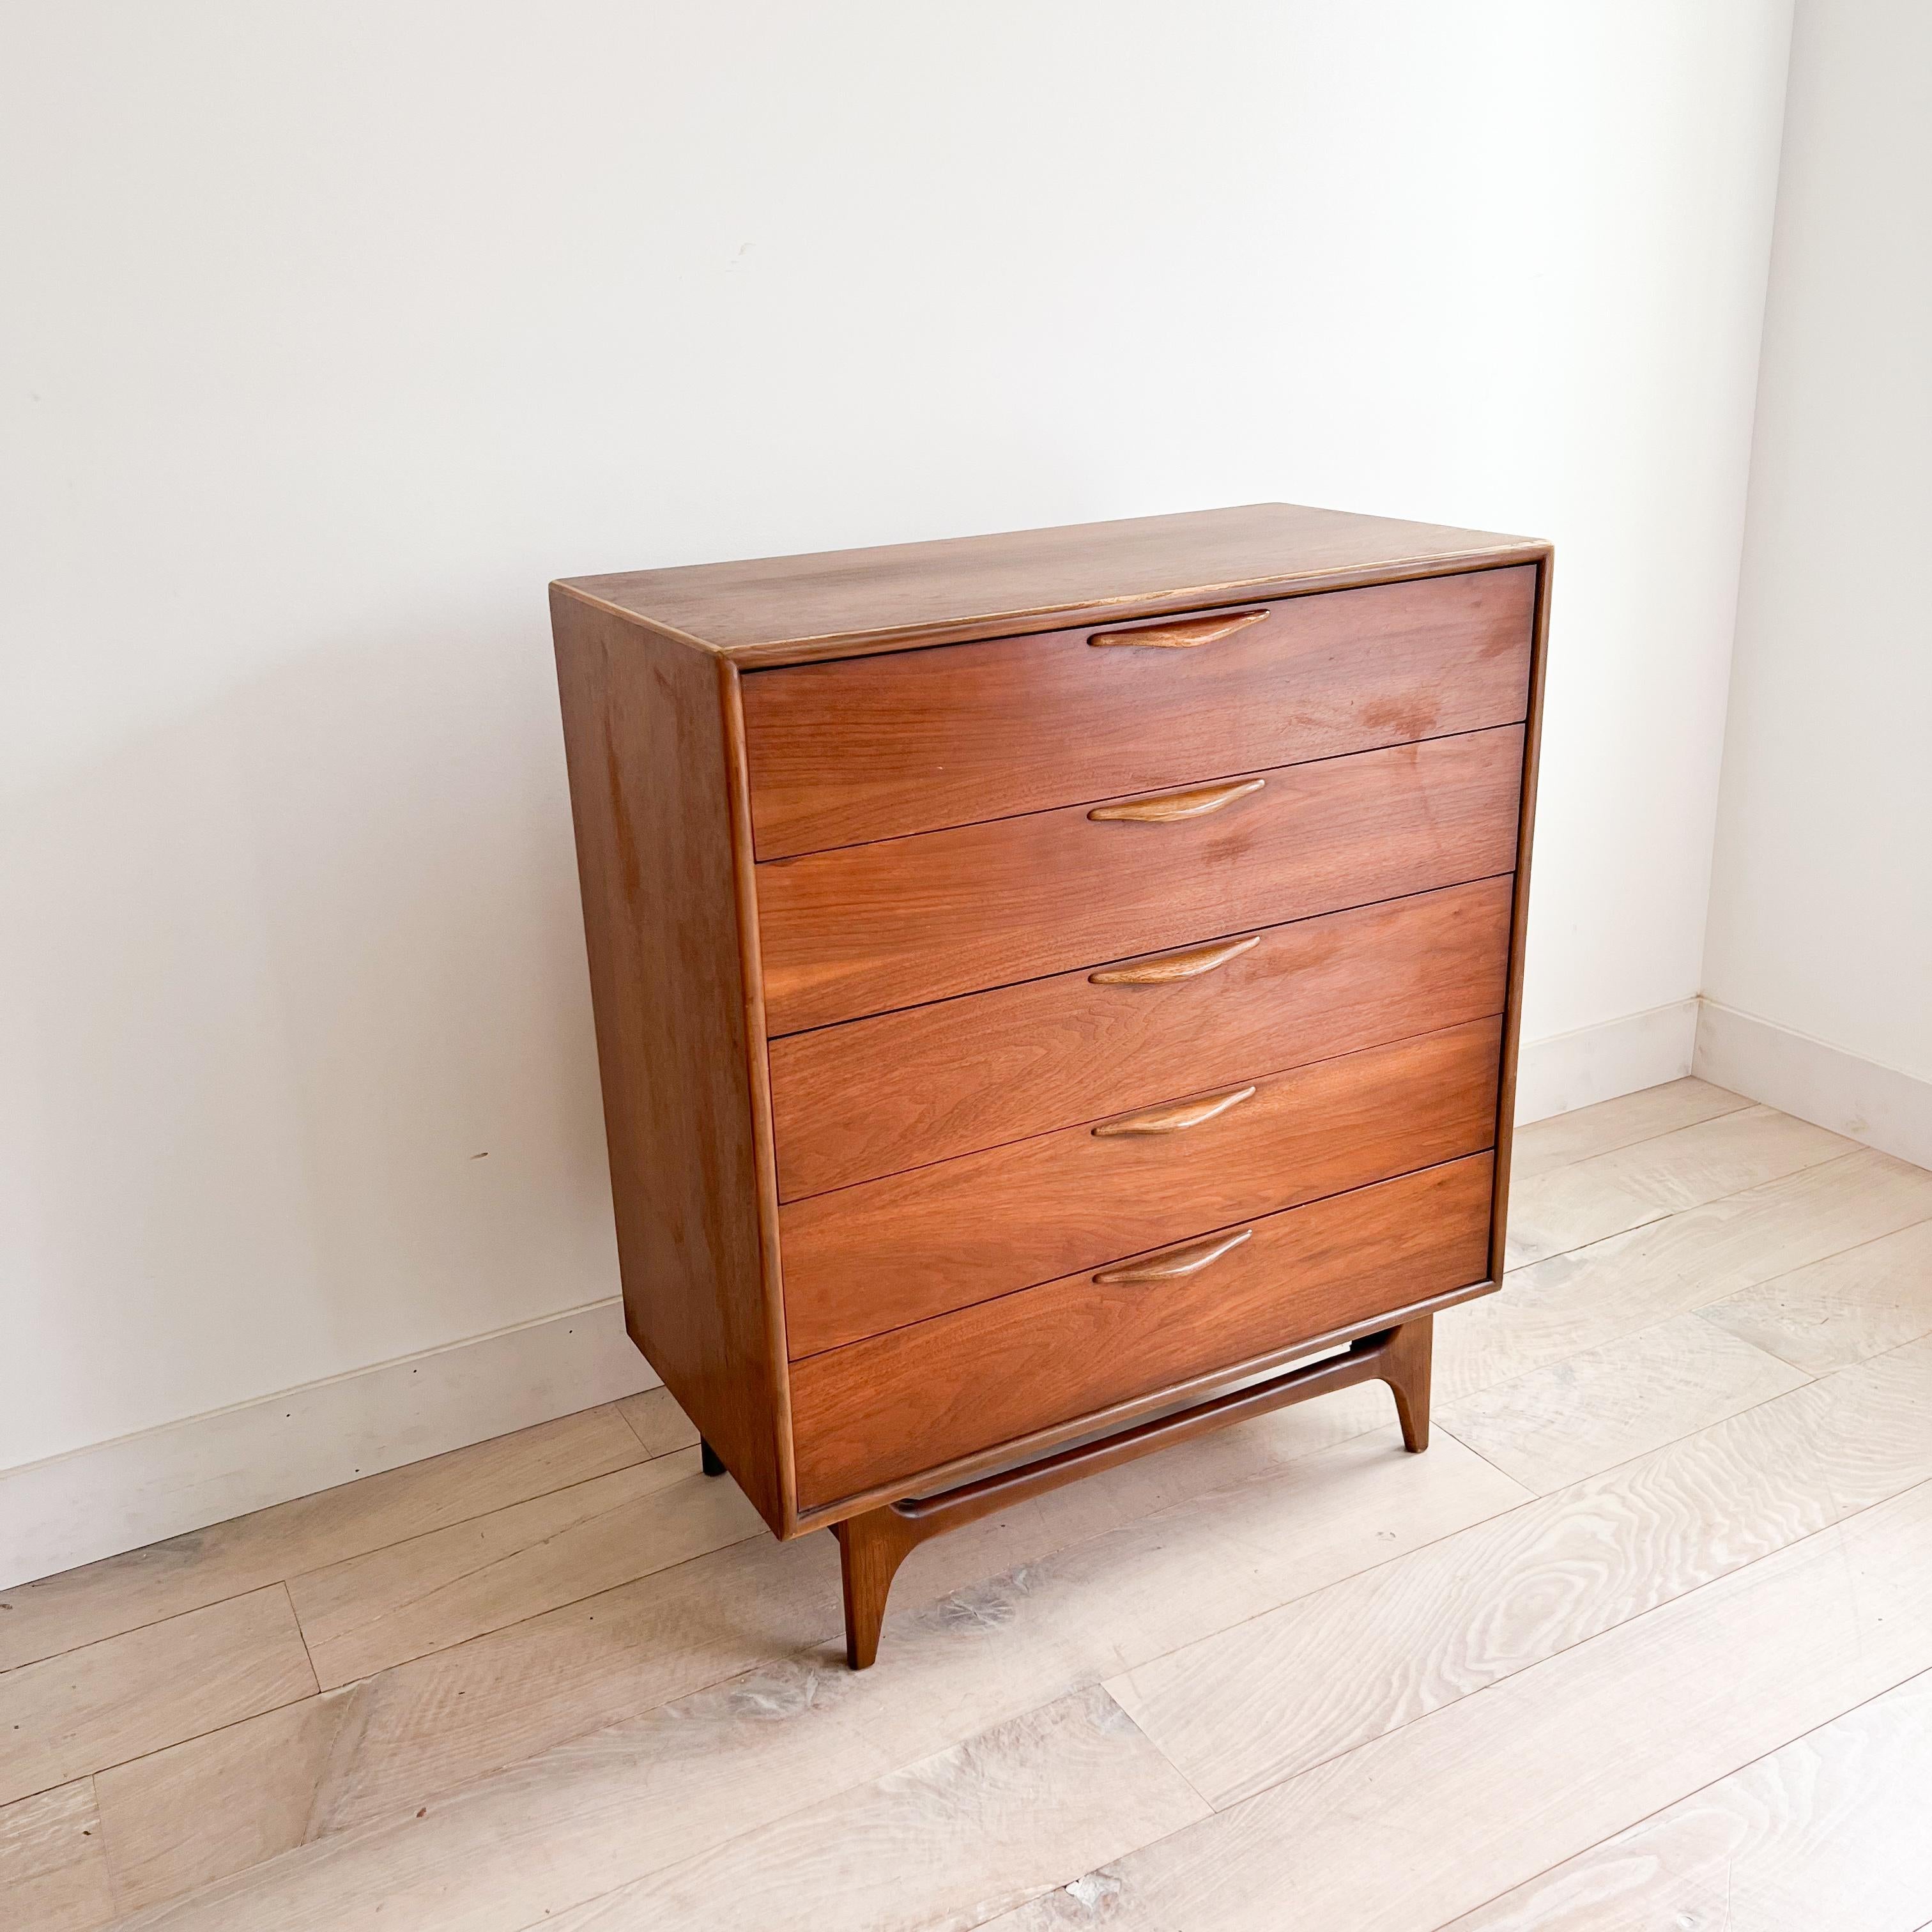 Mid century modern walnut highboy dresser by the Lane Perception line. The top has been sanded and restored.Some light scuffing/scratching from age appropriate wear.

36”x18.5” 42.25”H